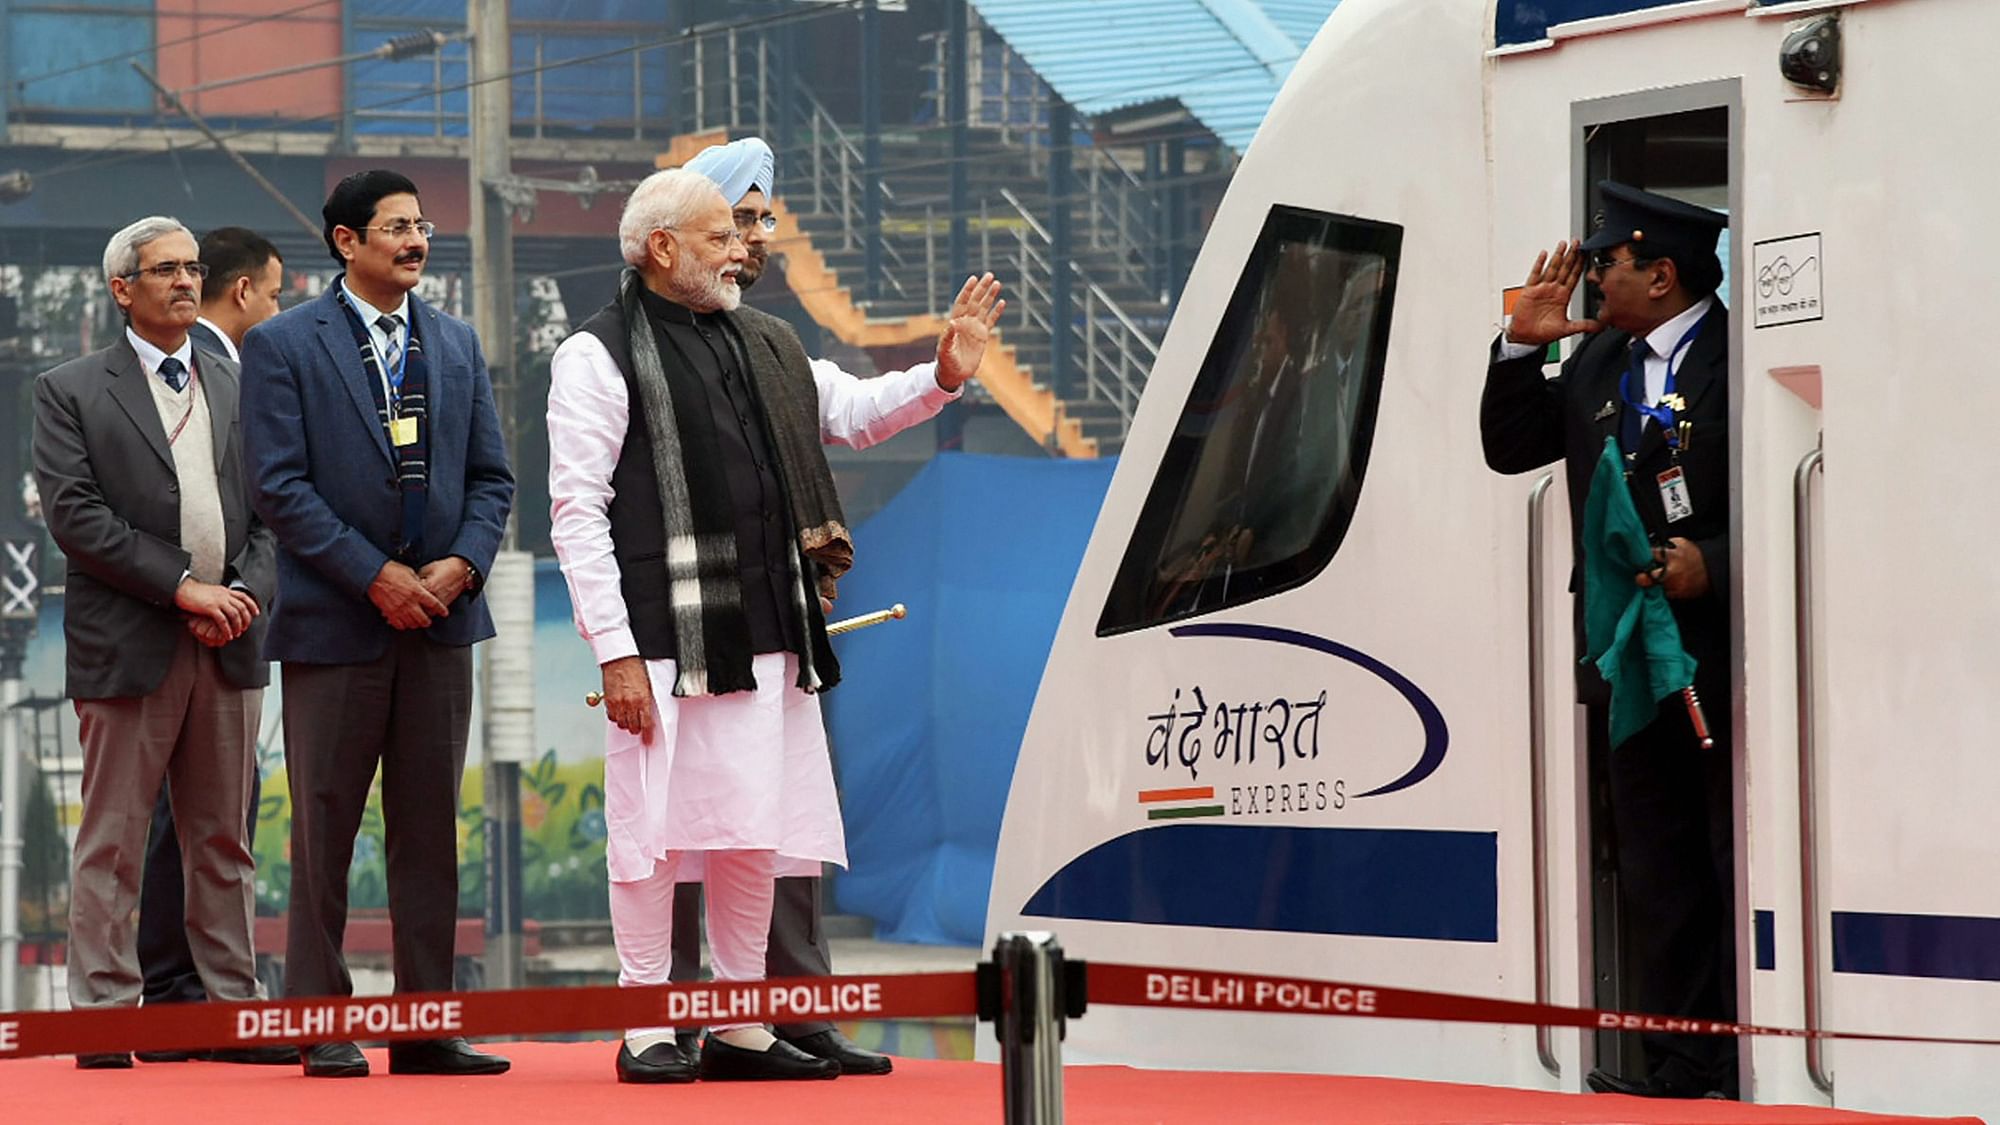 Prime Minister Narendra Modi flags off Vande Bharat Express, India’s first semi-high speed train, at New Delhi Railway Station.